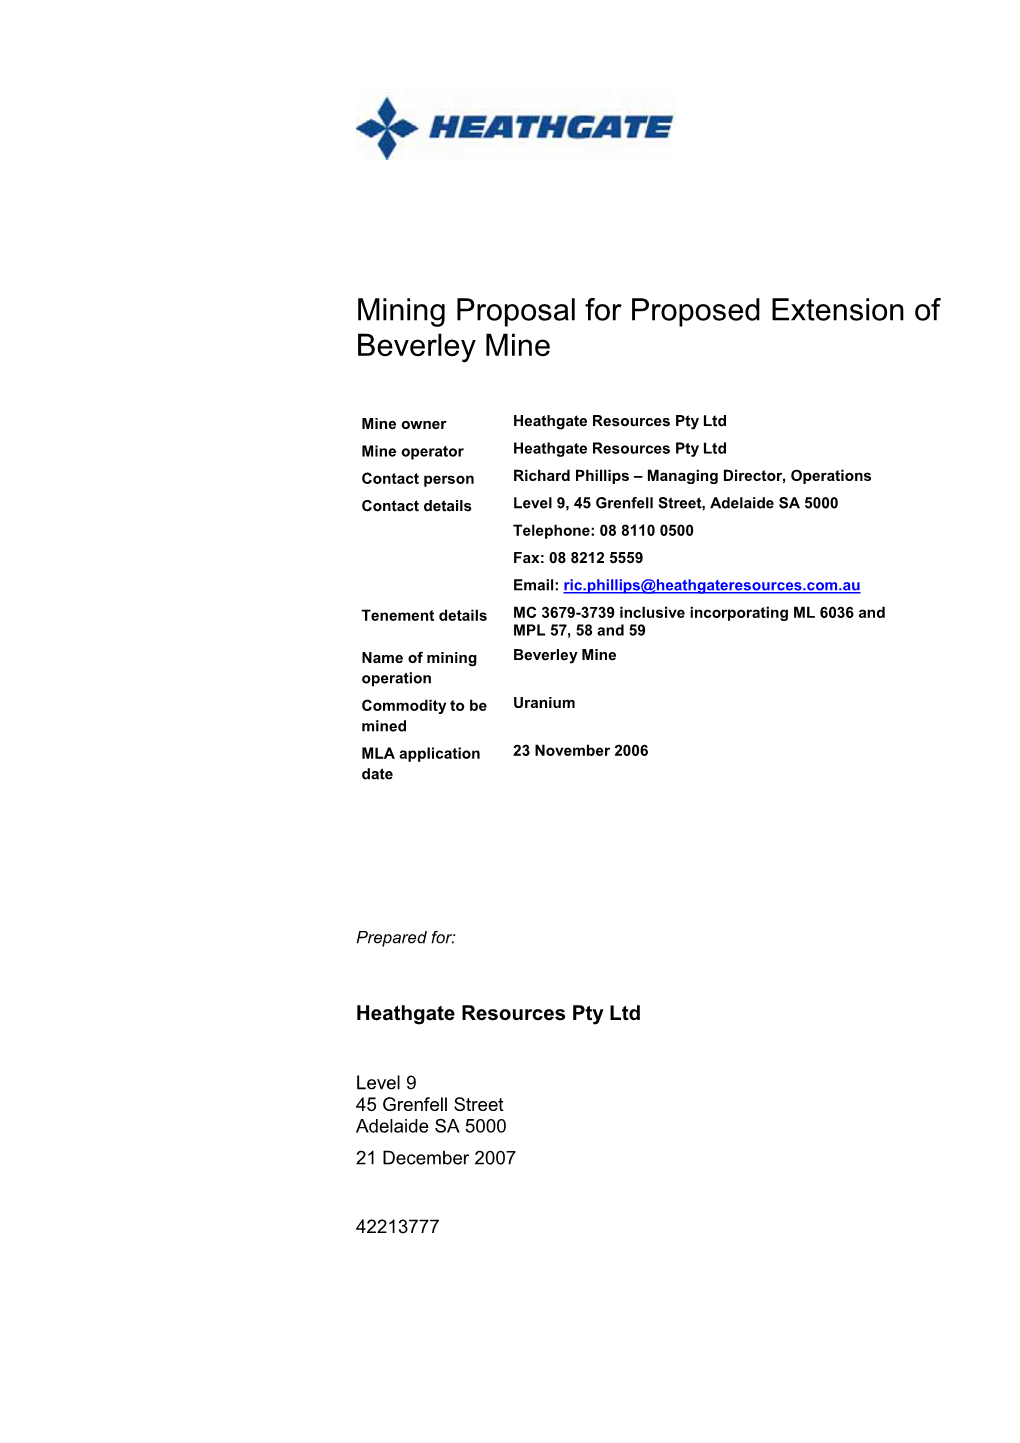 Mining Proposal for Proposed Extension of Beverley Mine